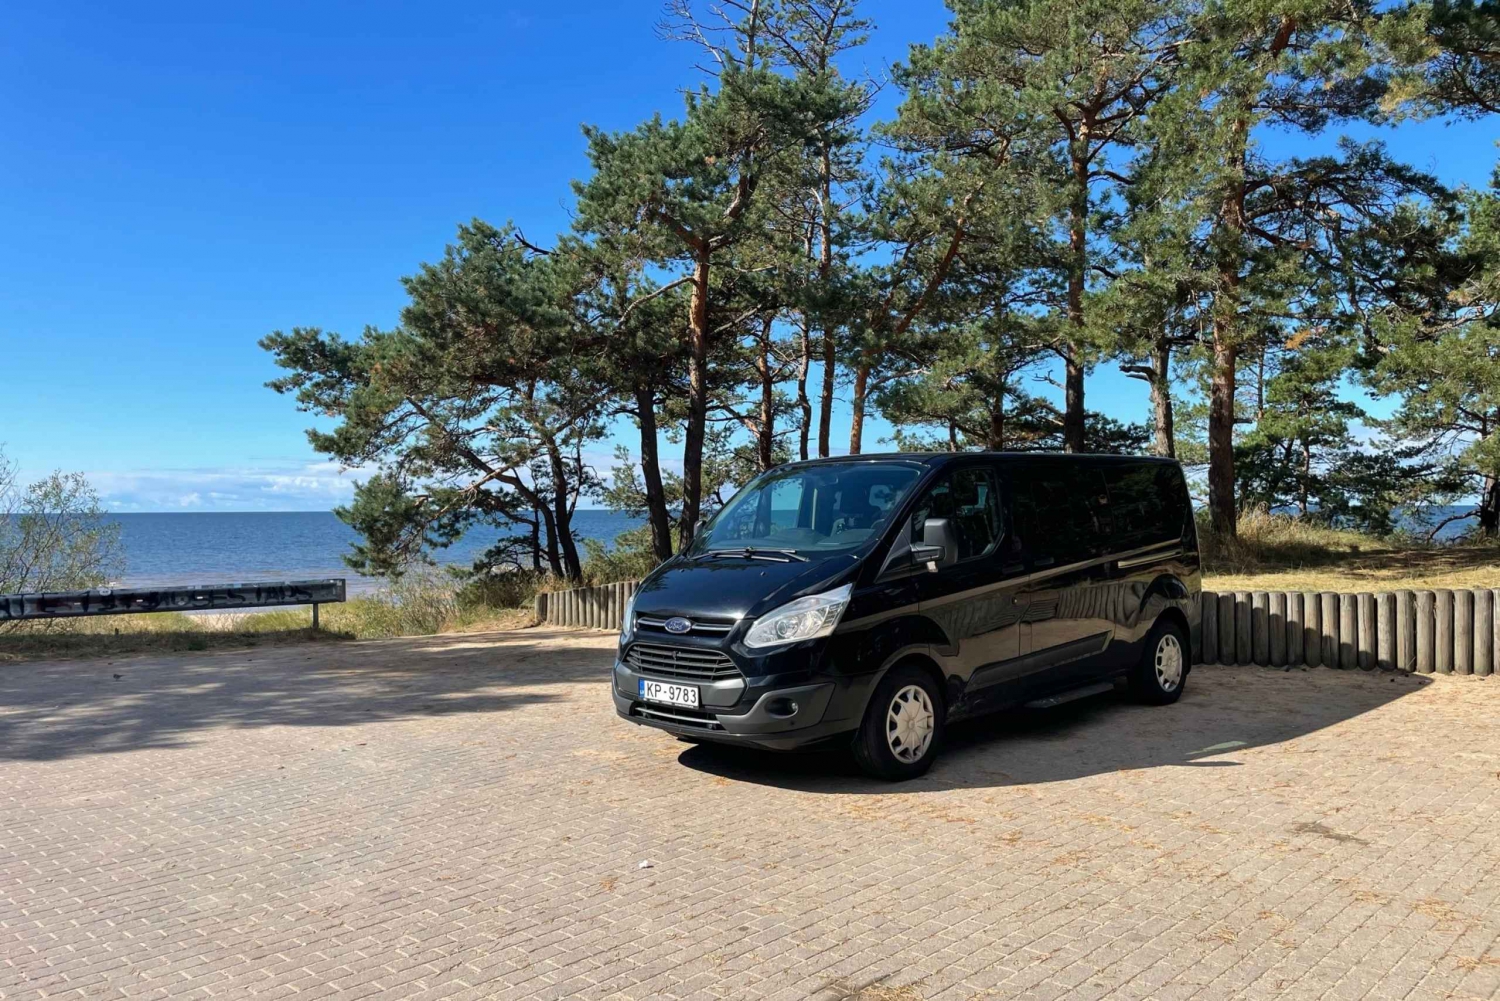 From Riga: Private Transfer to Tallinn with Sightseeing